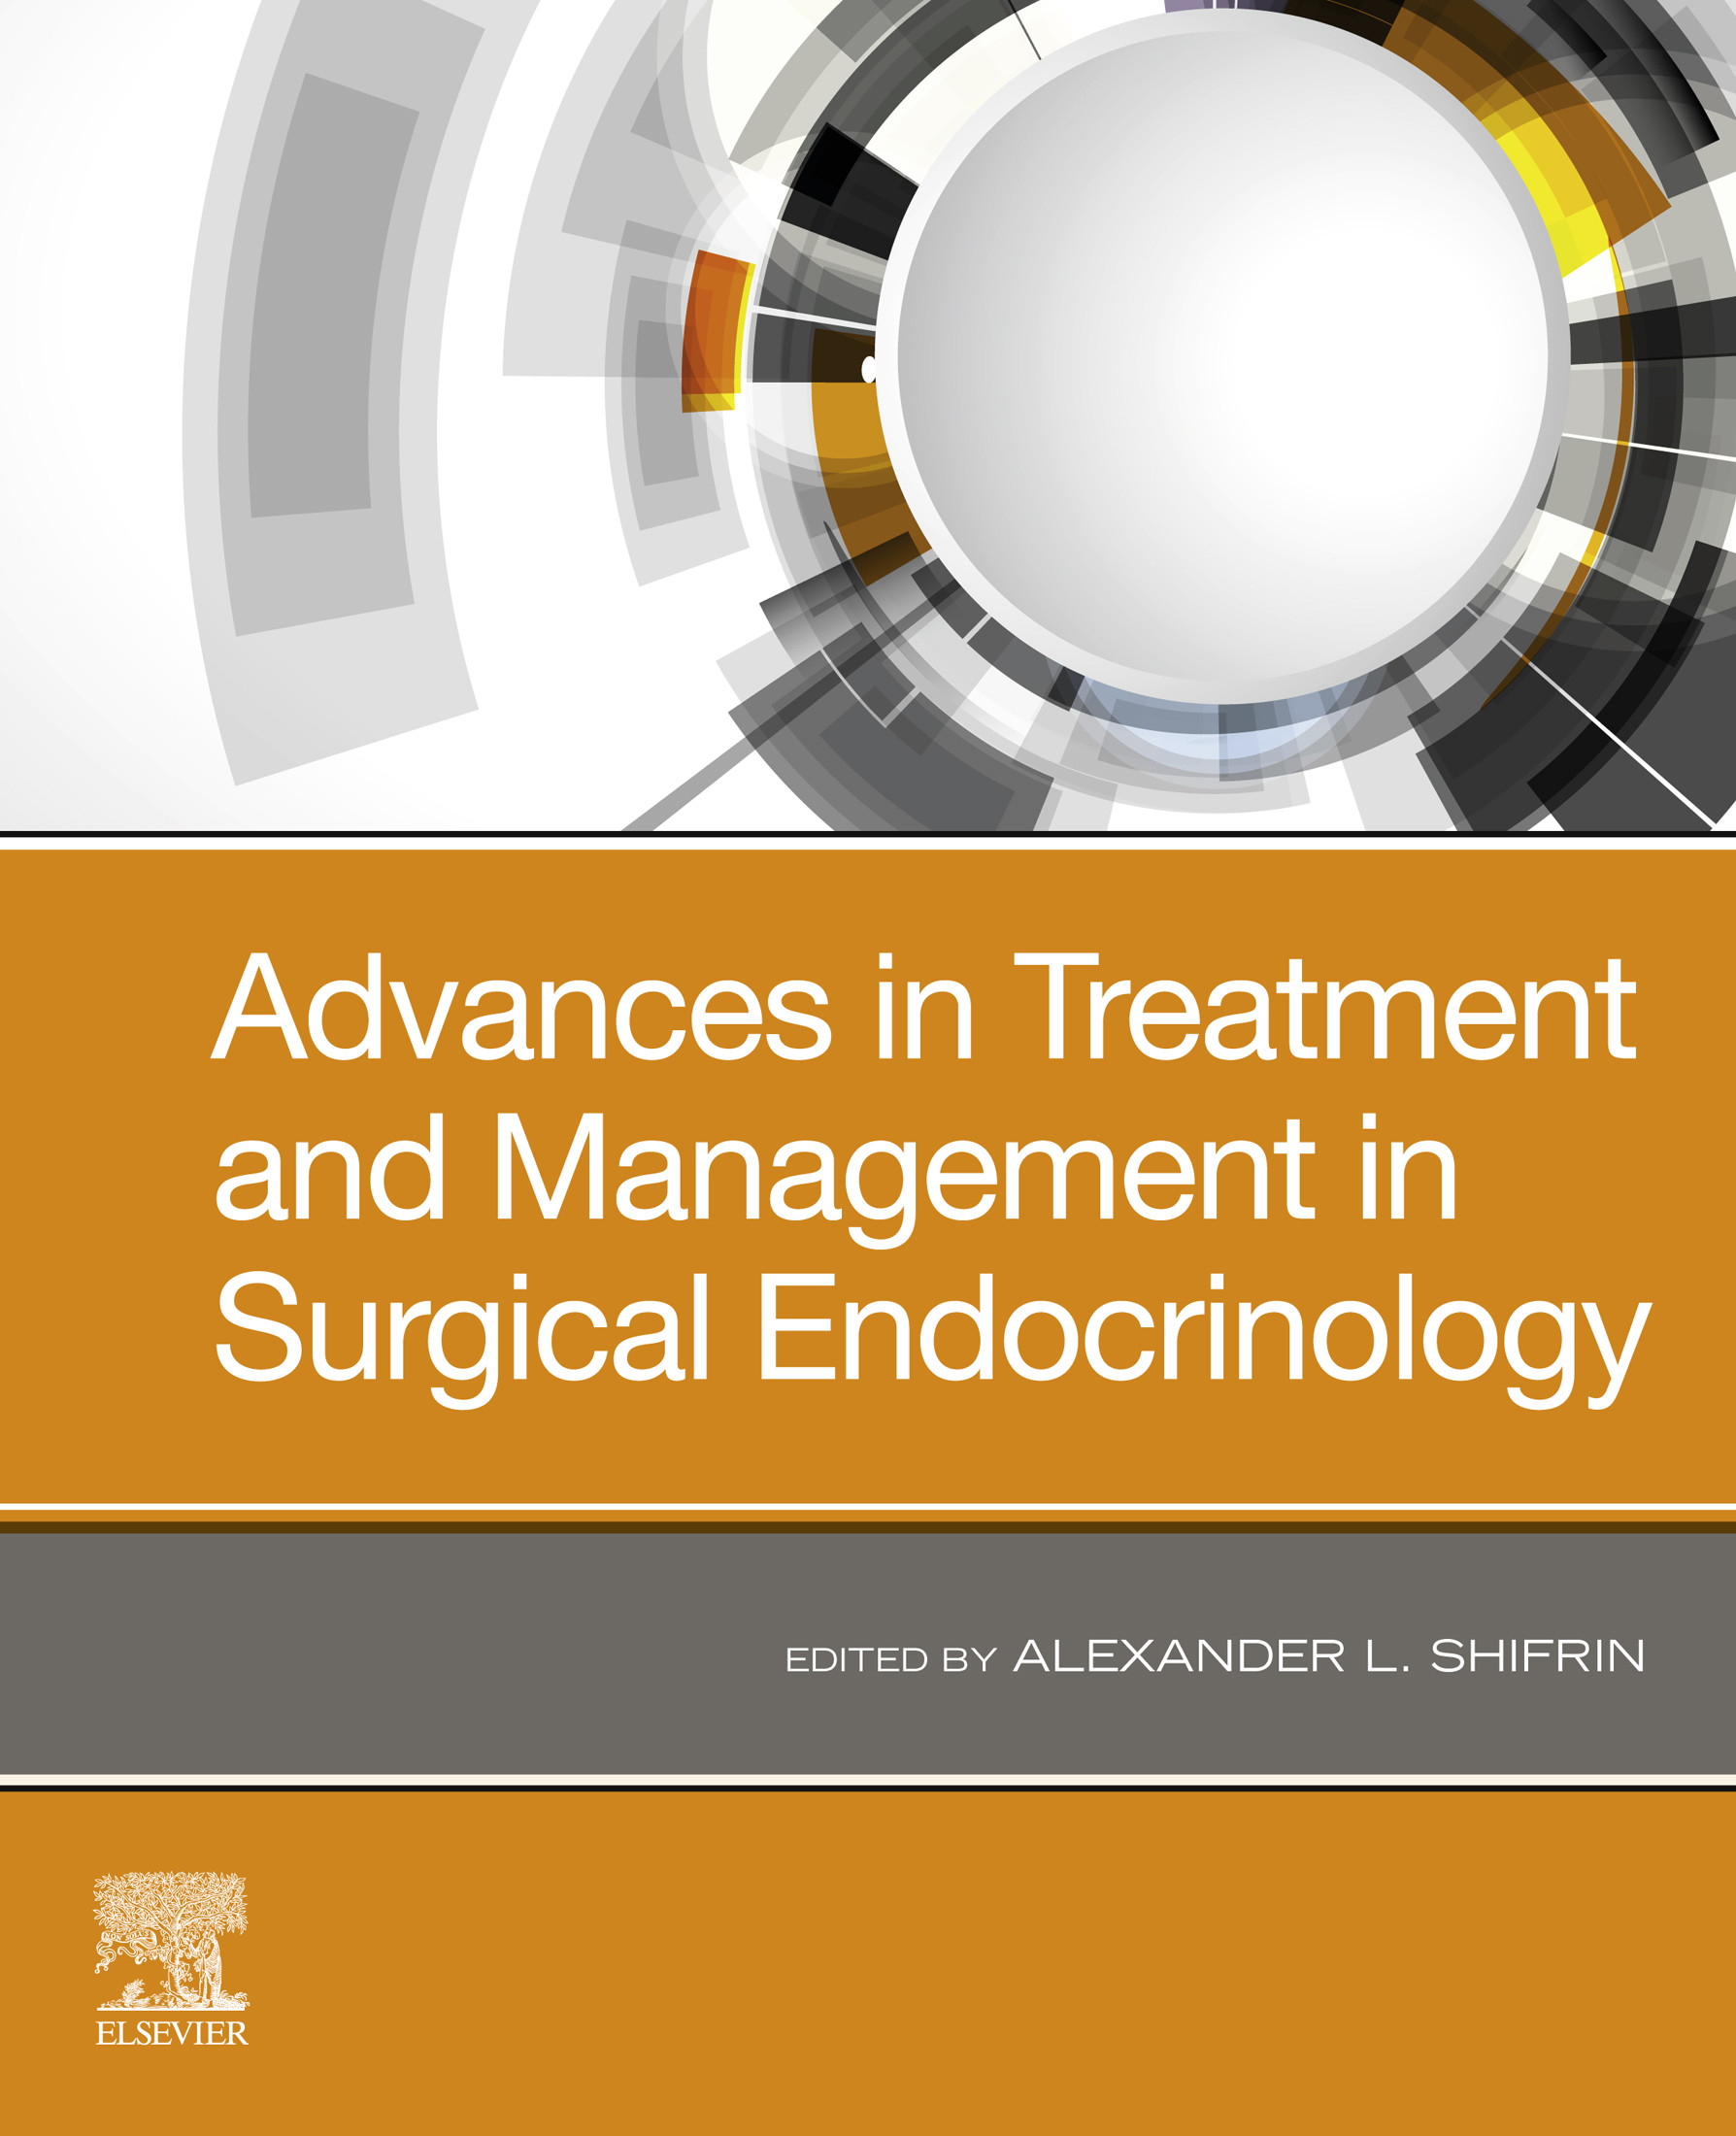 Advances in Treatment and Management in Surgical Endocrinology E-Book